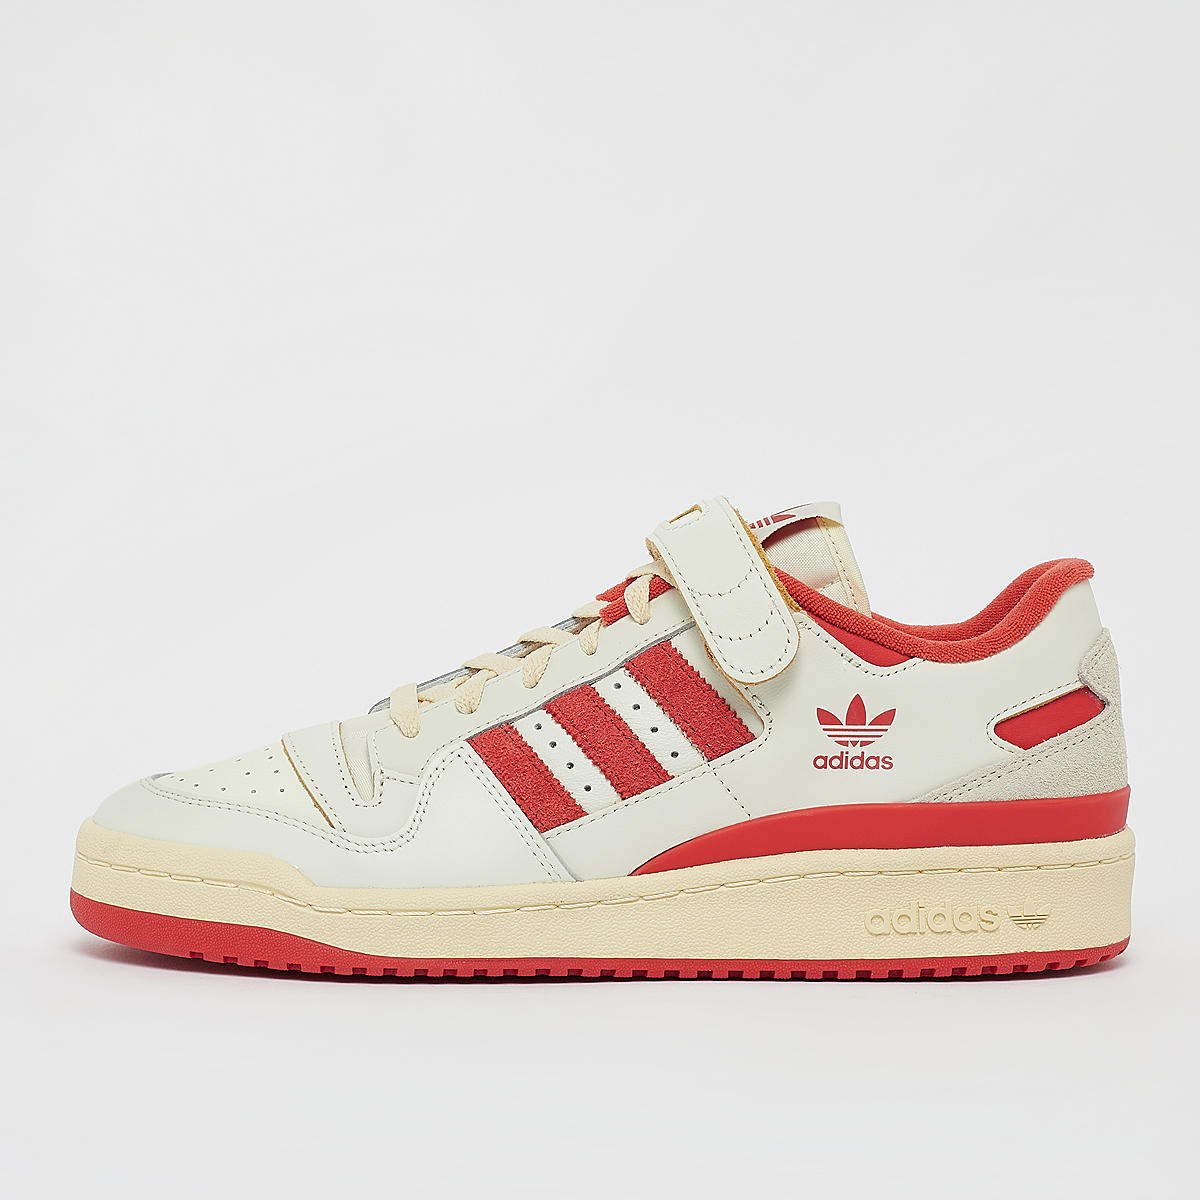 Sneaker Forum 84 Low, adidas Originals, Footwear, ivory/preloved red/easy yellow, taille: 41 1/3